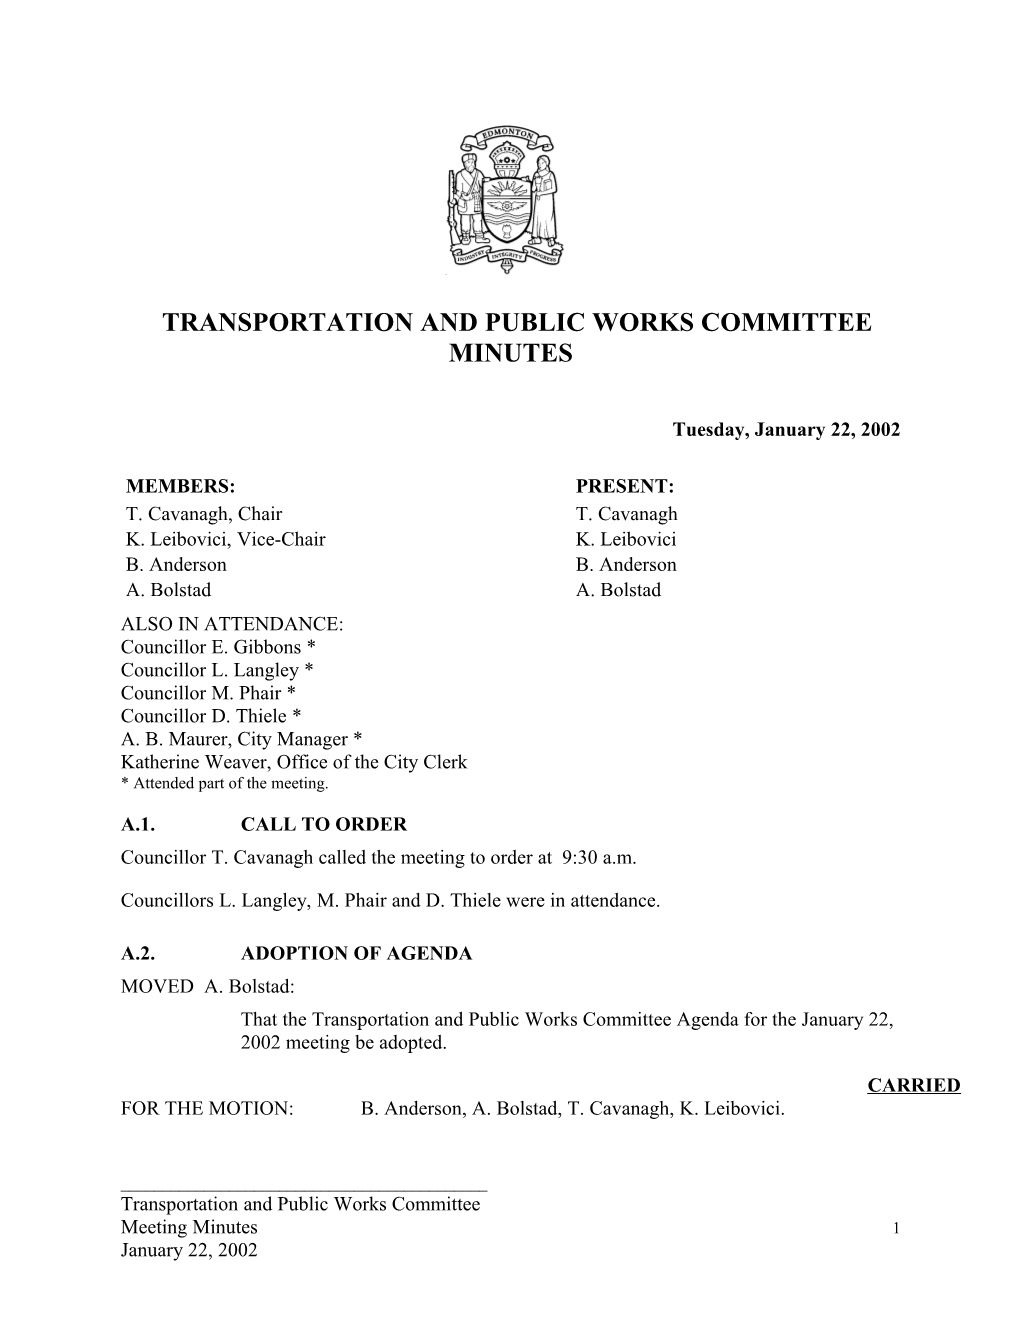 Minutes for Transportation and Public Works Committee January 22, 2002 Meeting